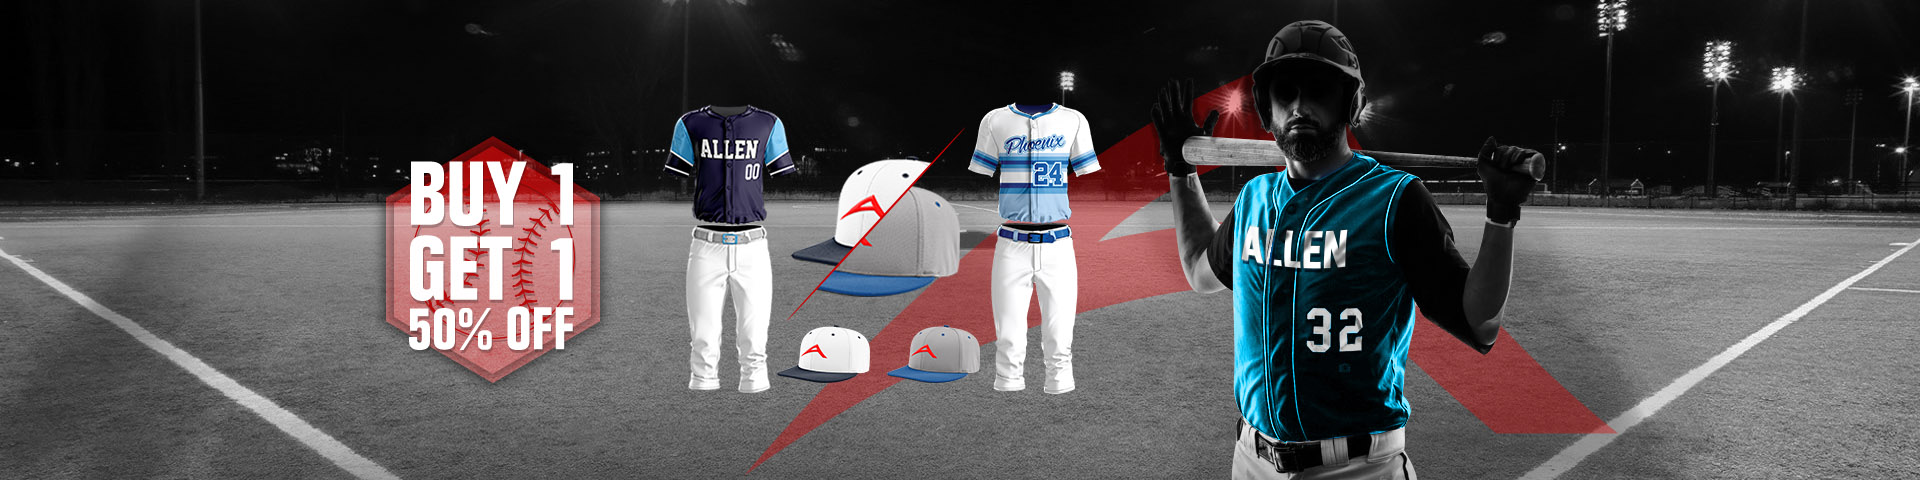 custom youth baseball uniforms packages